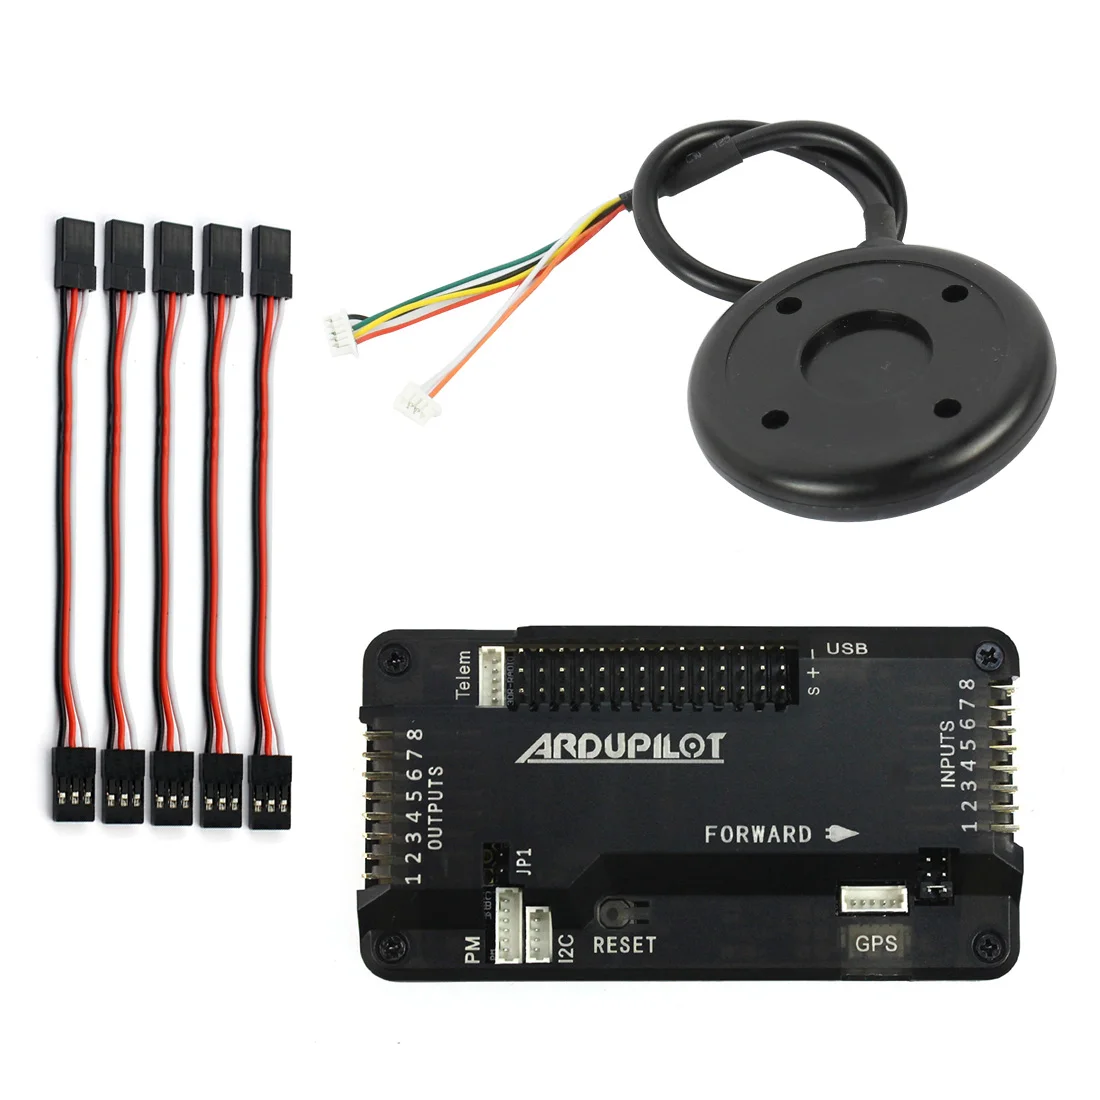 

F14586-C APM2.8 APM 2.8 RC Multicopter Flight Controller Board with Case 6M GPS Compass for DIY FPV RC Drone Multirotor